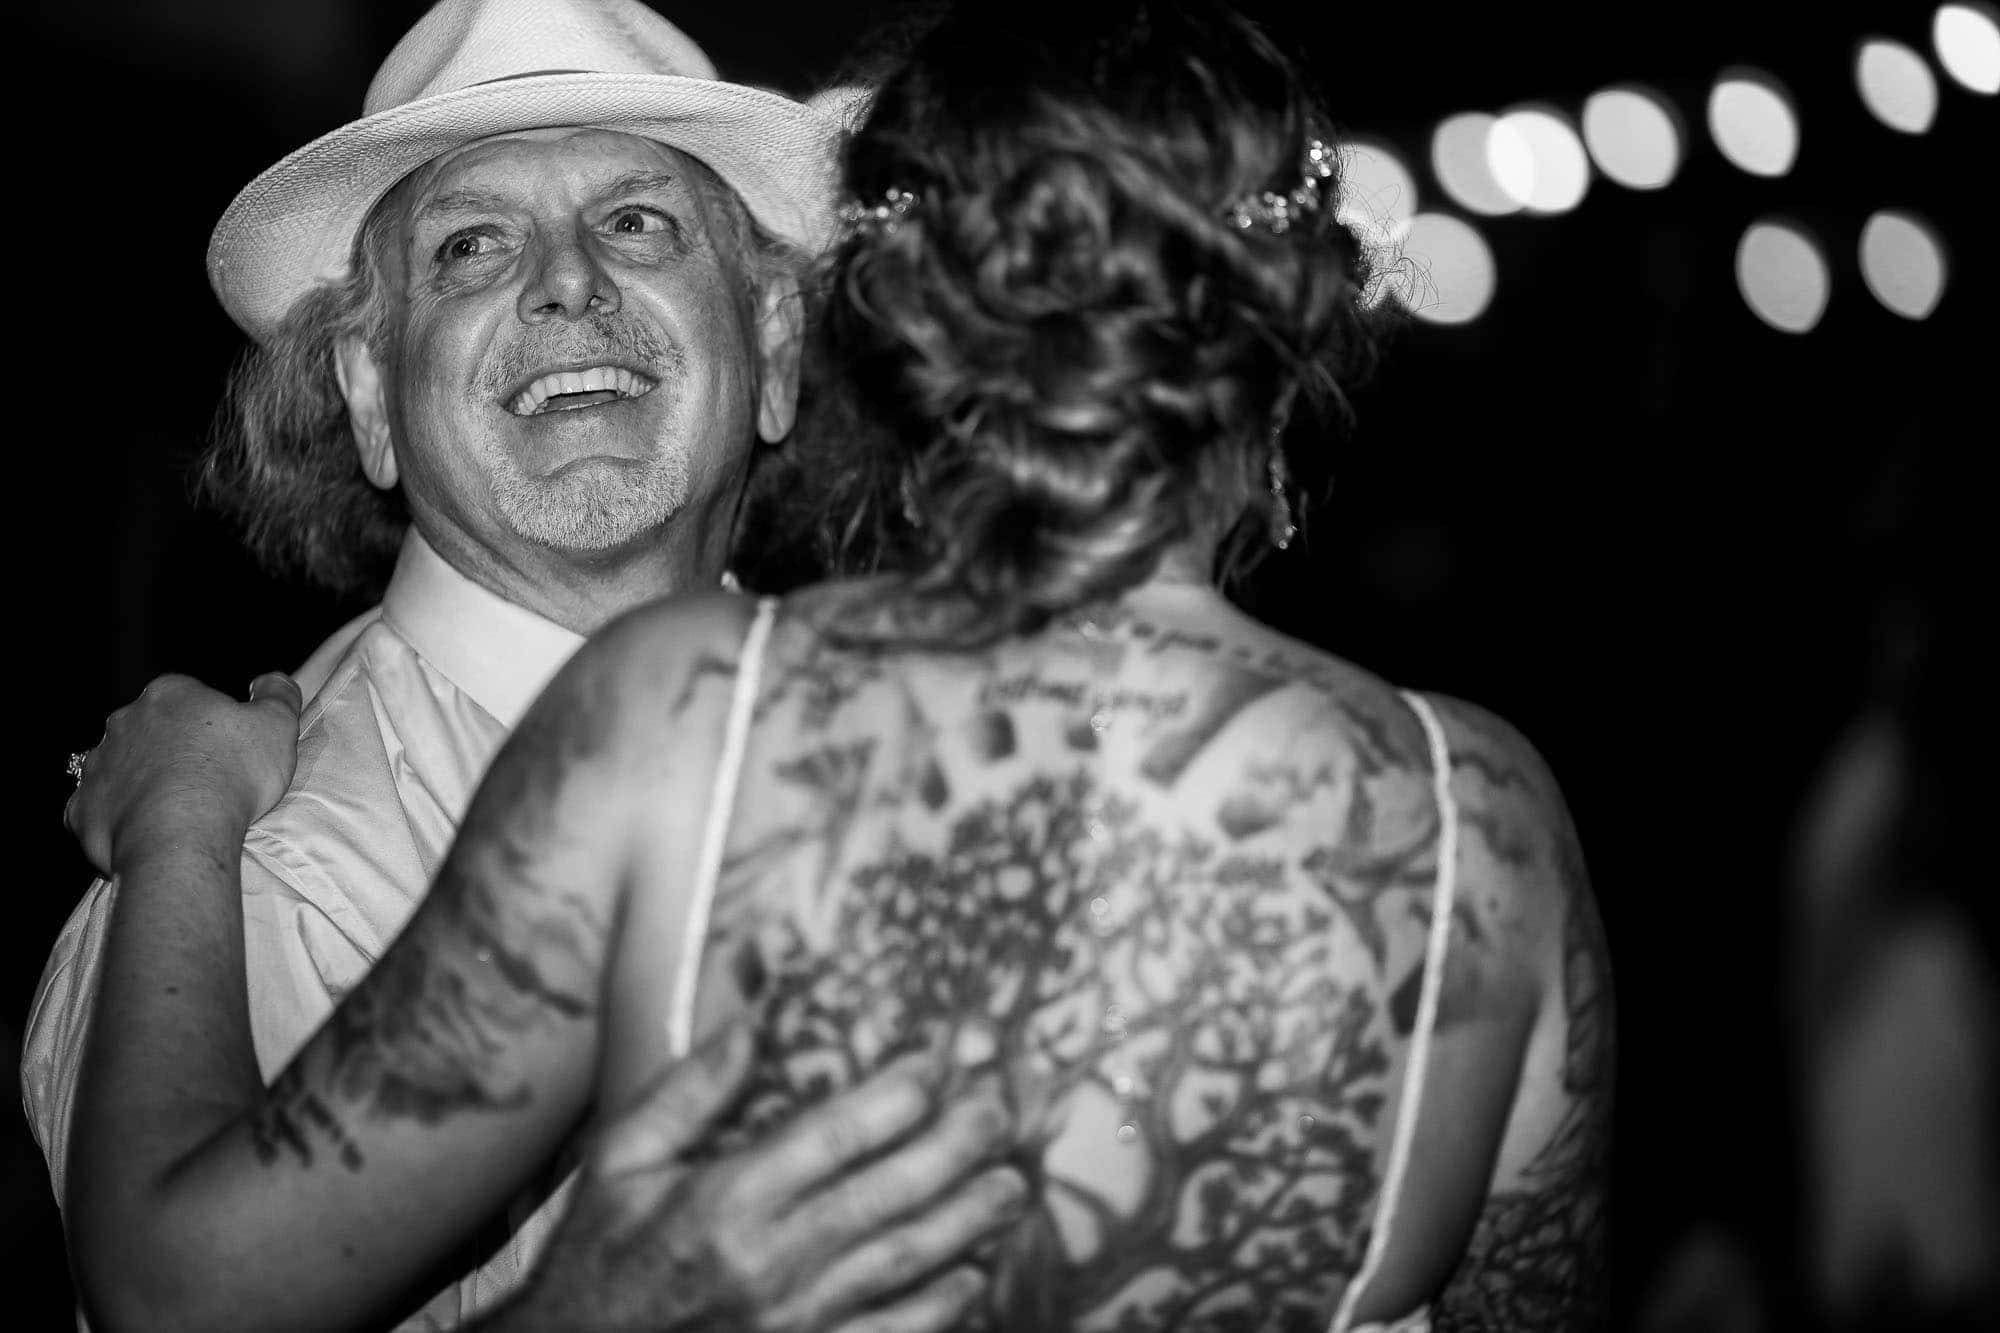 Dancing with the tattooed bride